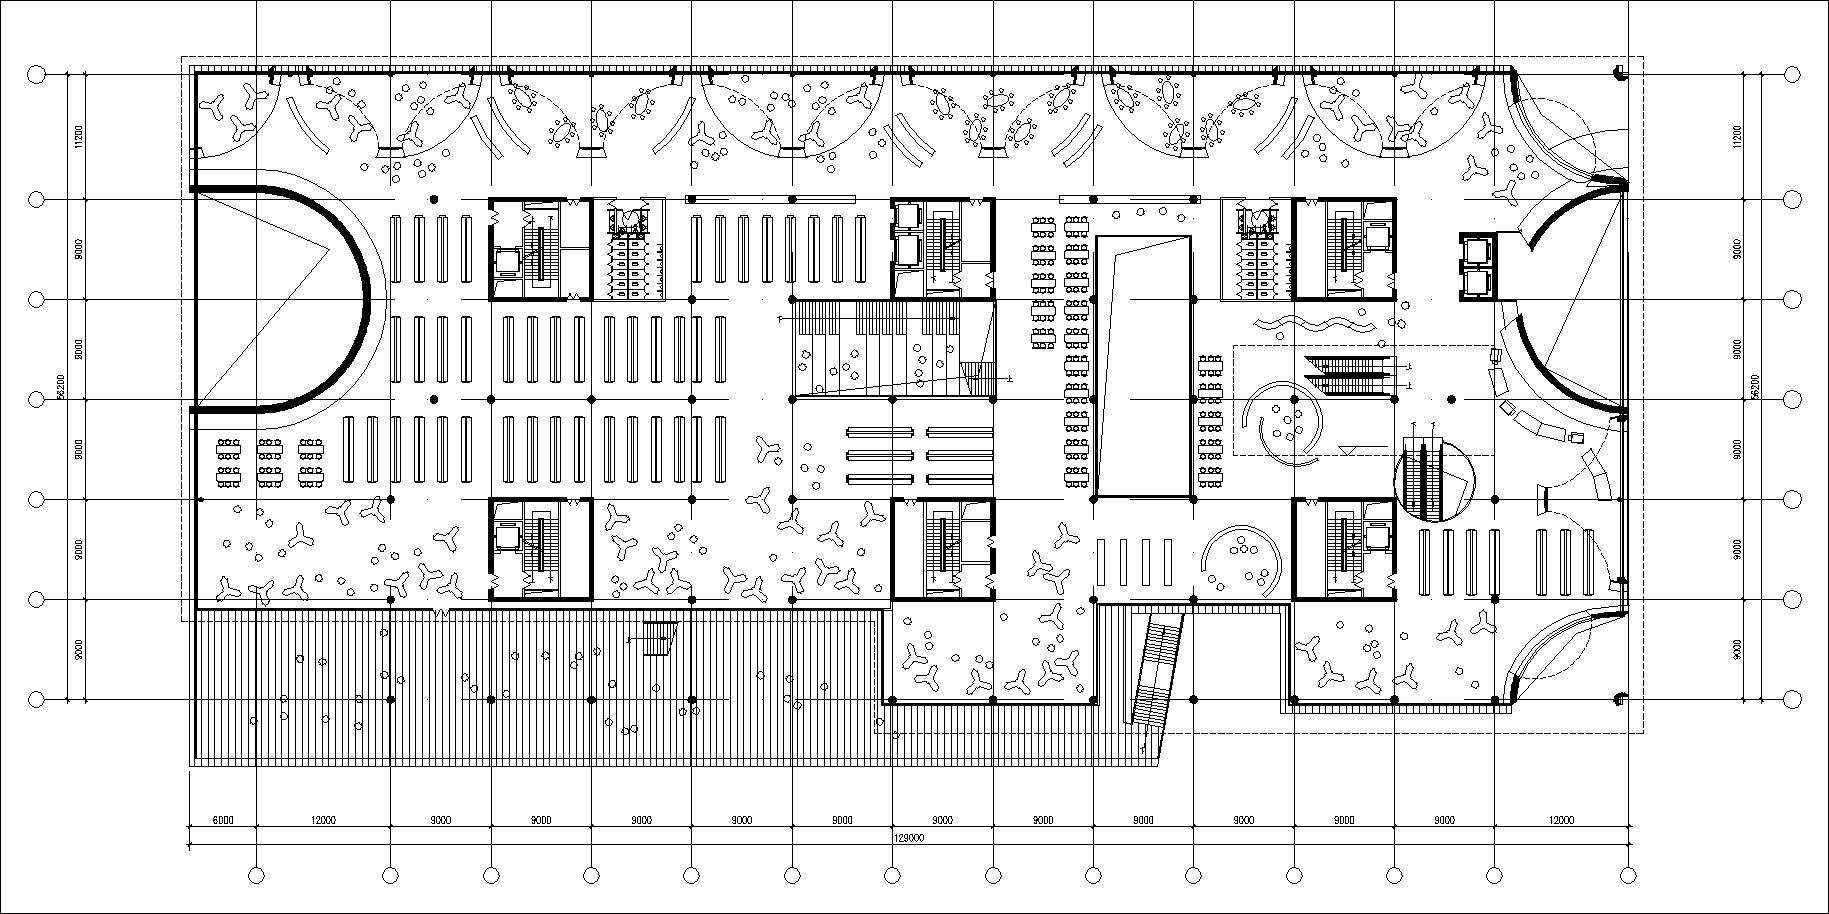 Library Floor Plans and Drawings-Elevations, Floor Plans, and Details